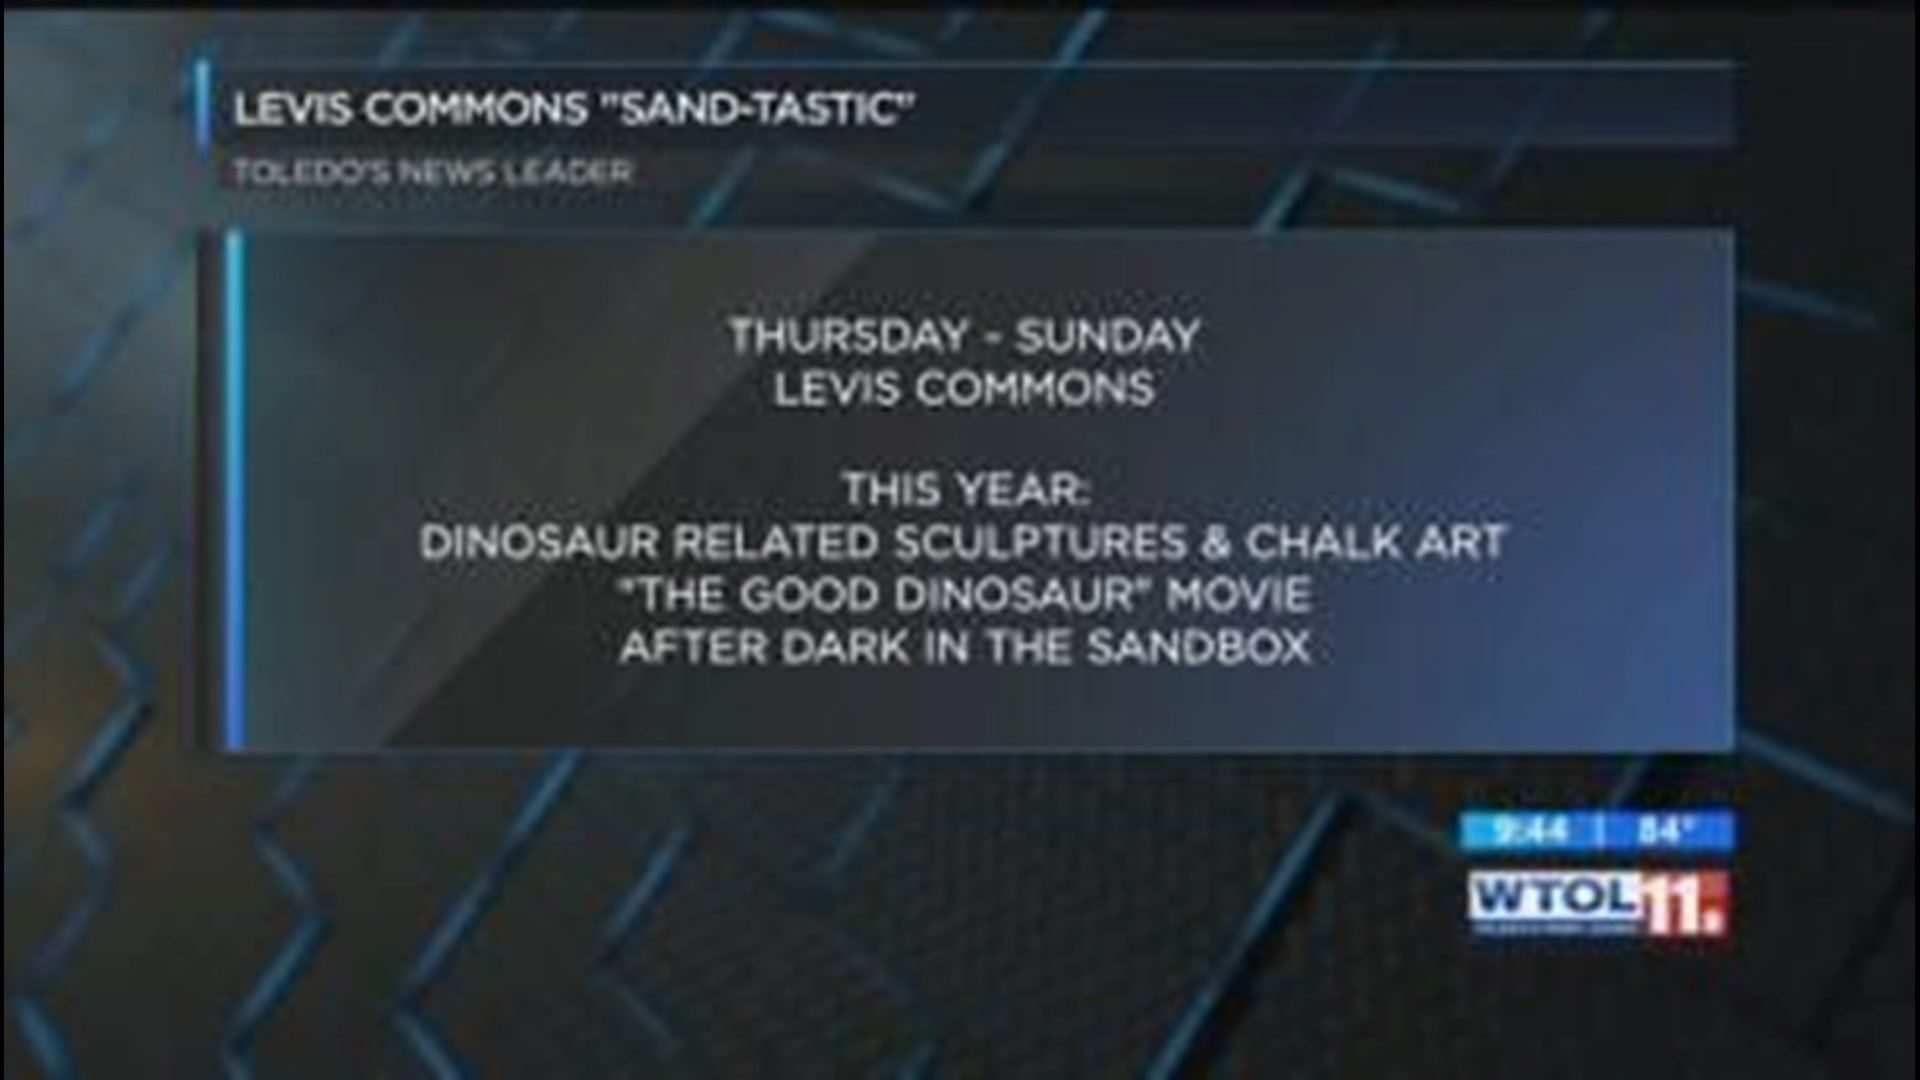 Don't miss Sandtastic at Levis Commons